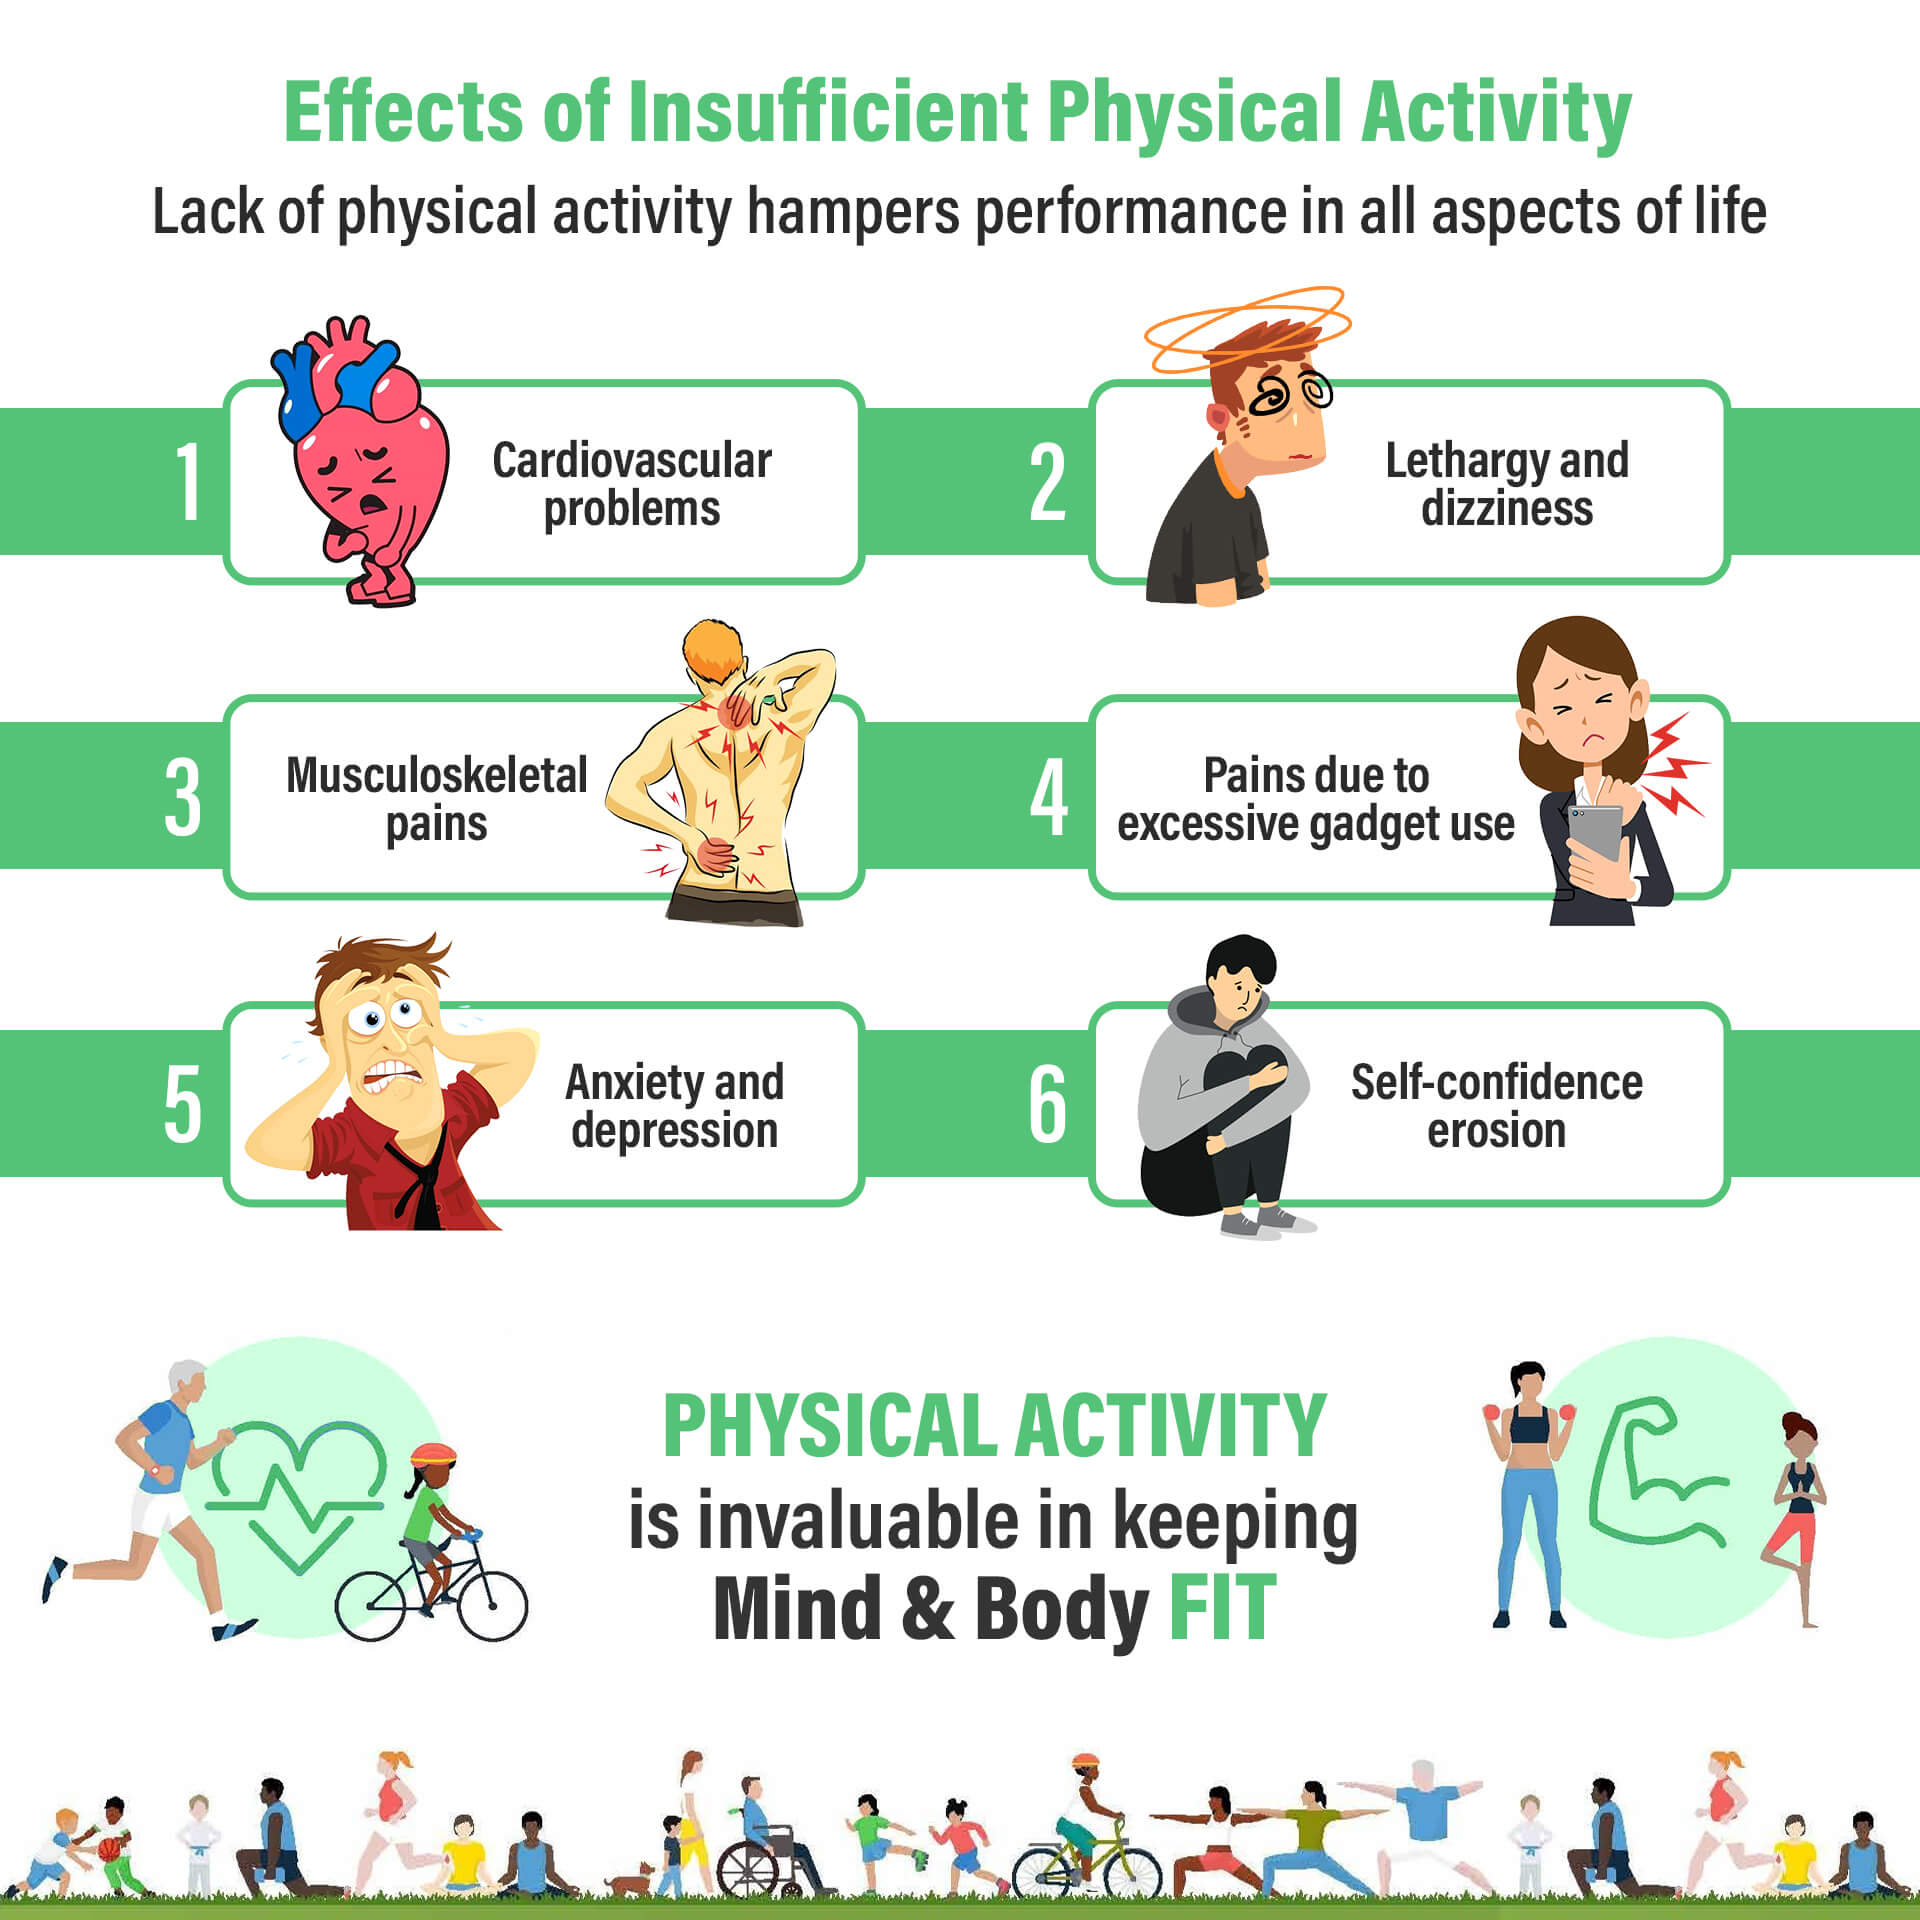 Effects of Insufficient Physical Activity